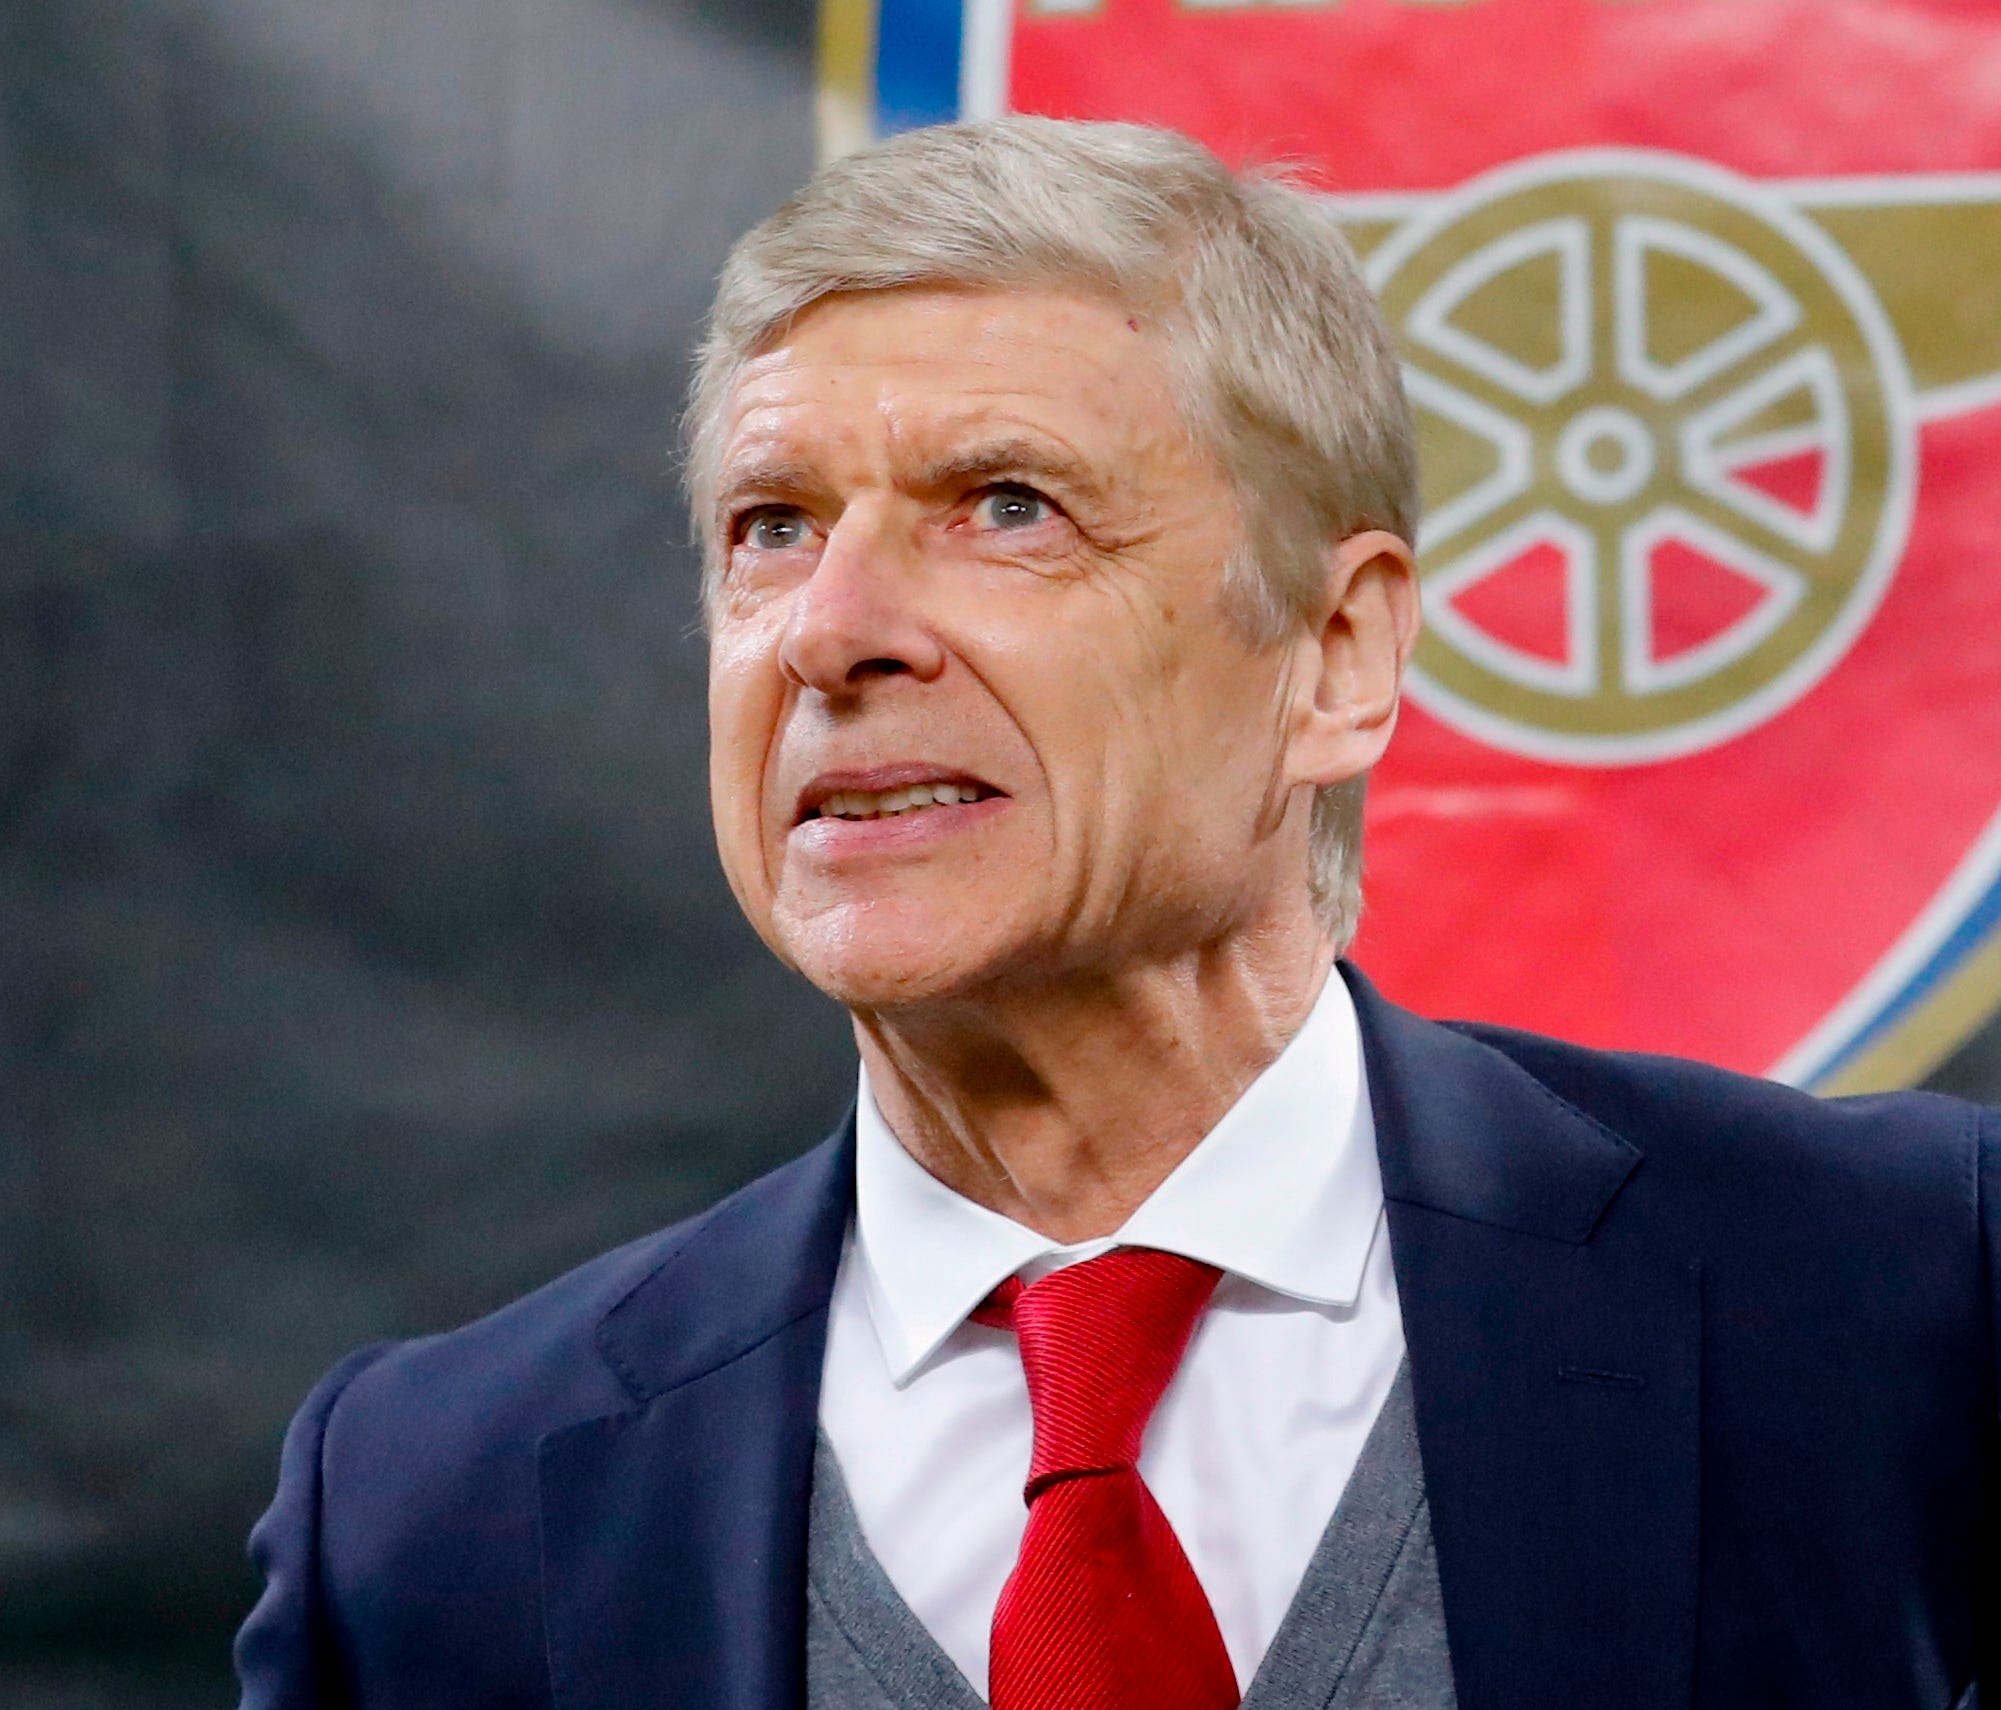 Wenger during a Champions League match in March.